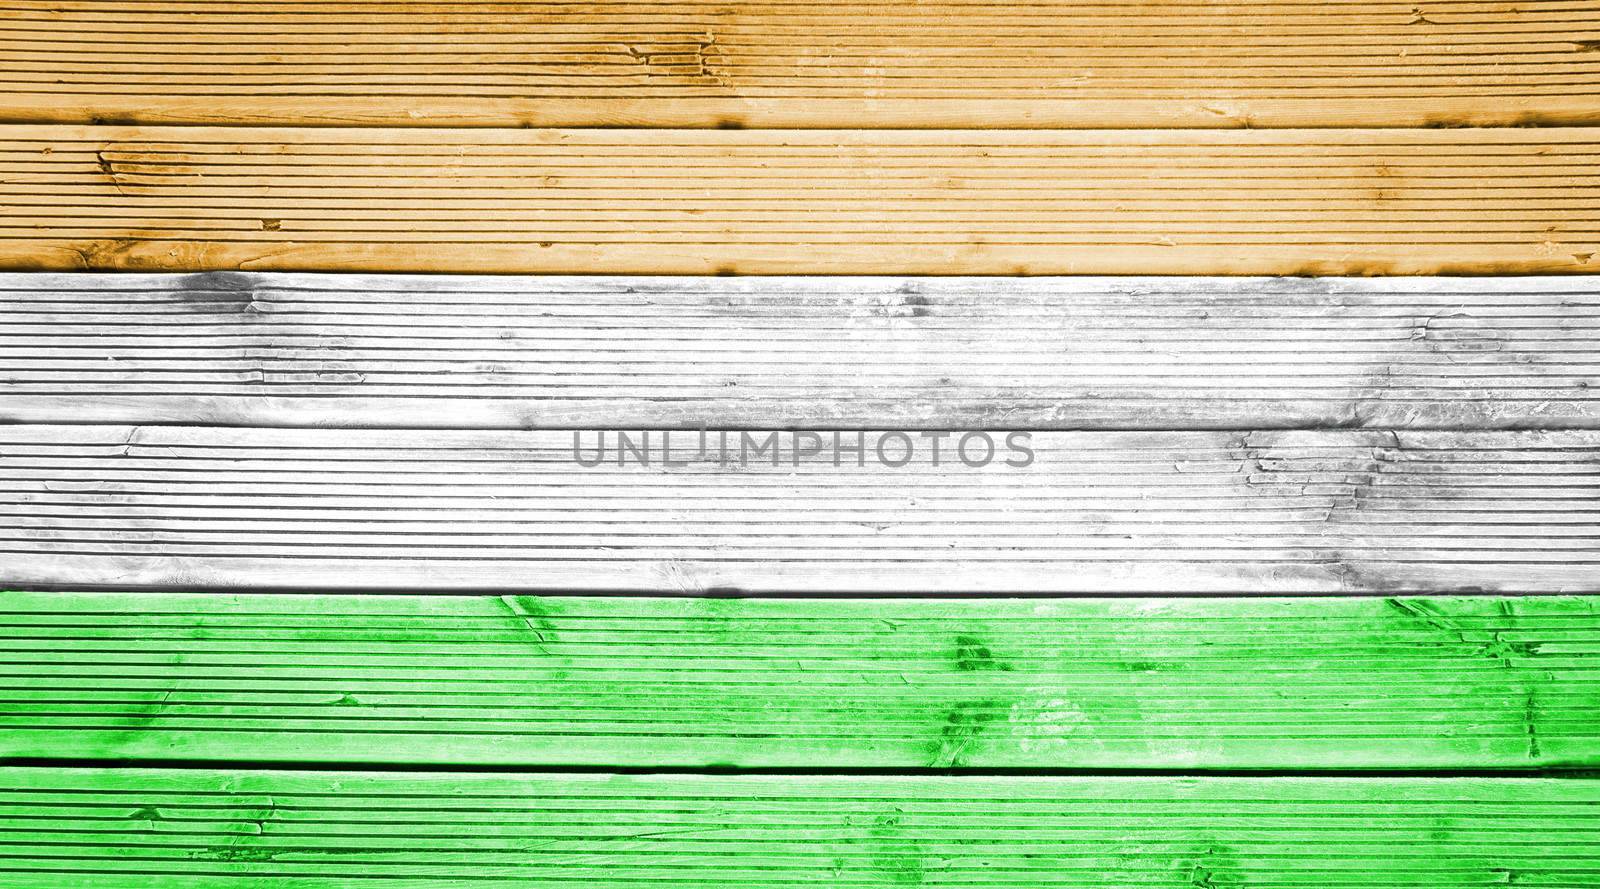 Natural wood planks texture background with the colors of the flag of India